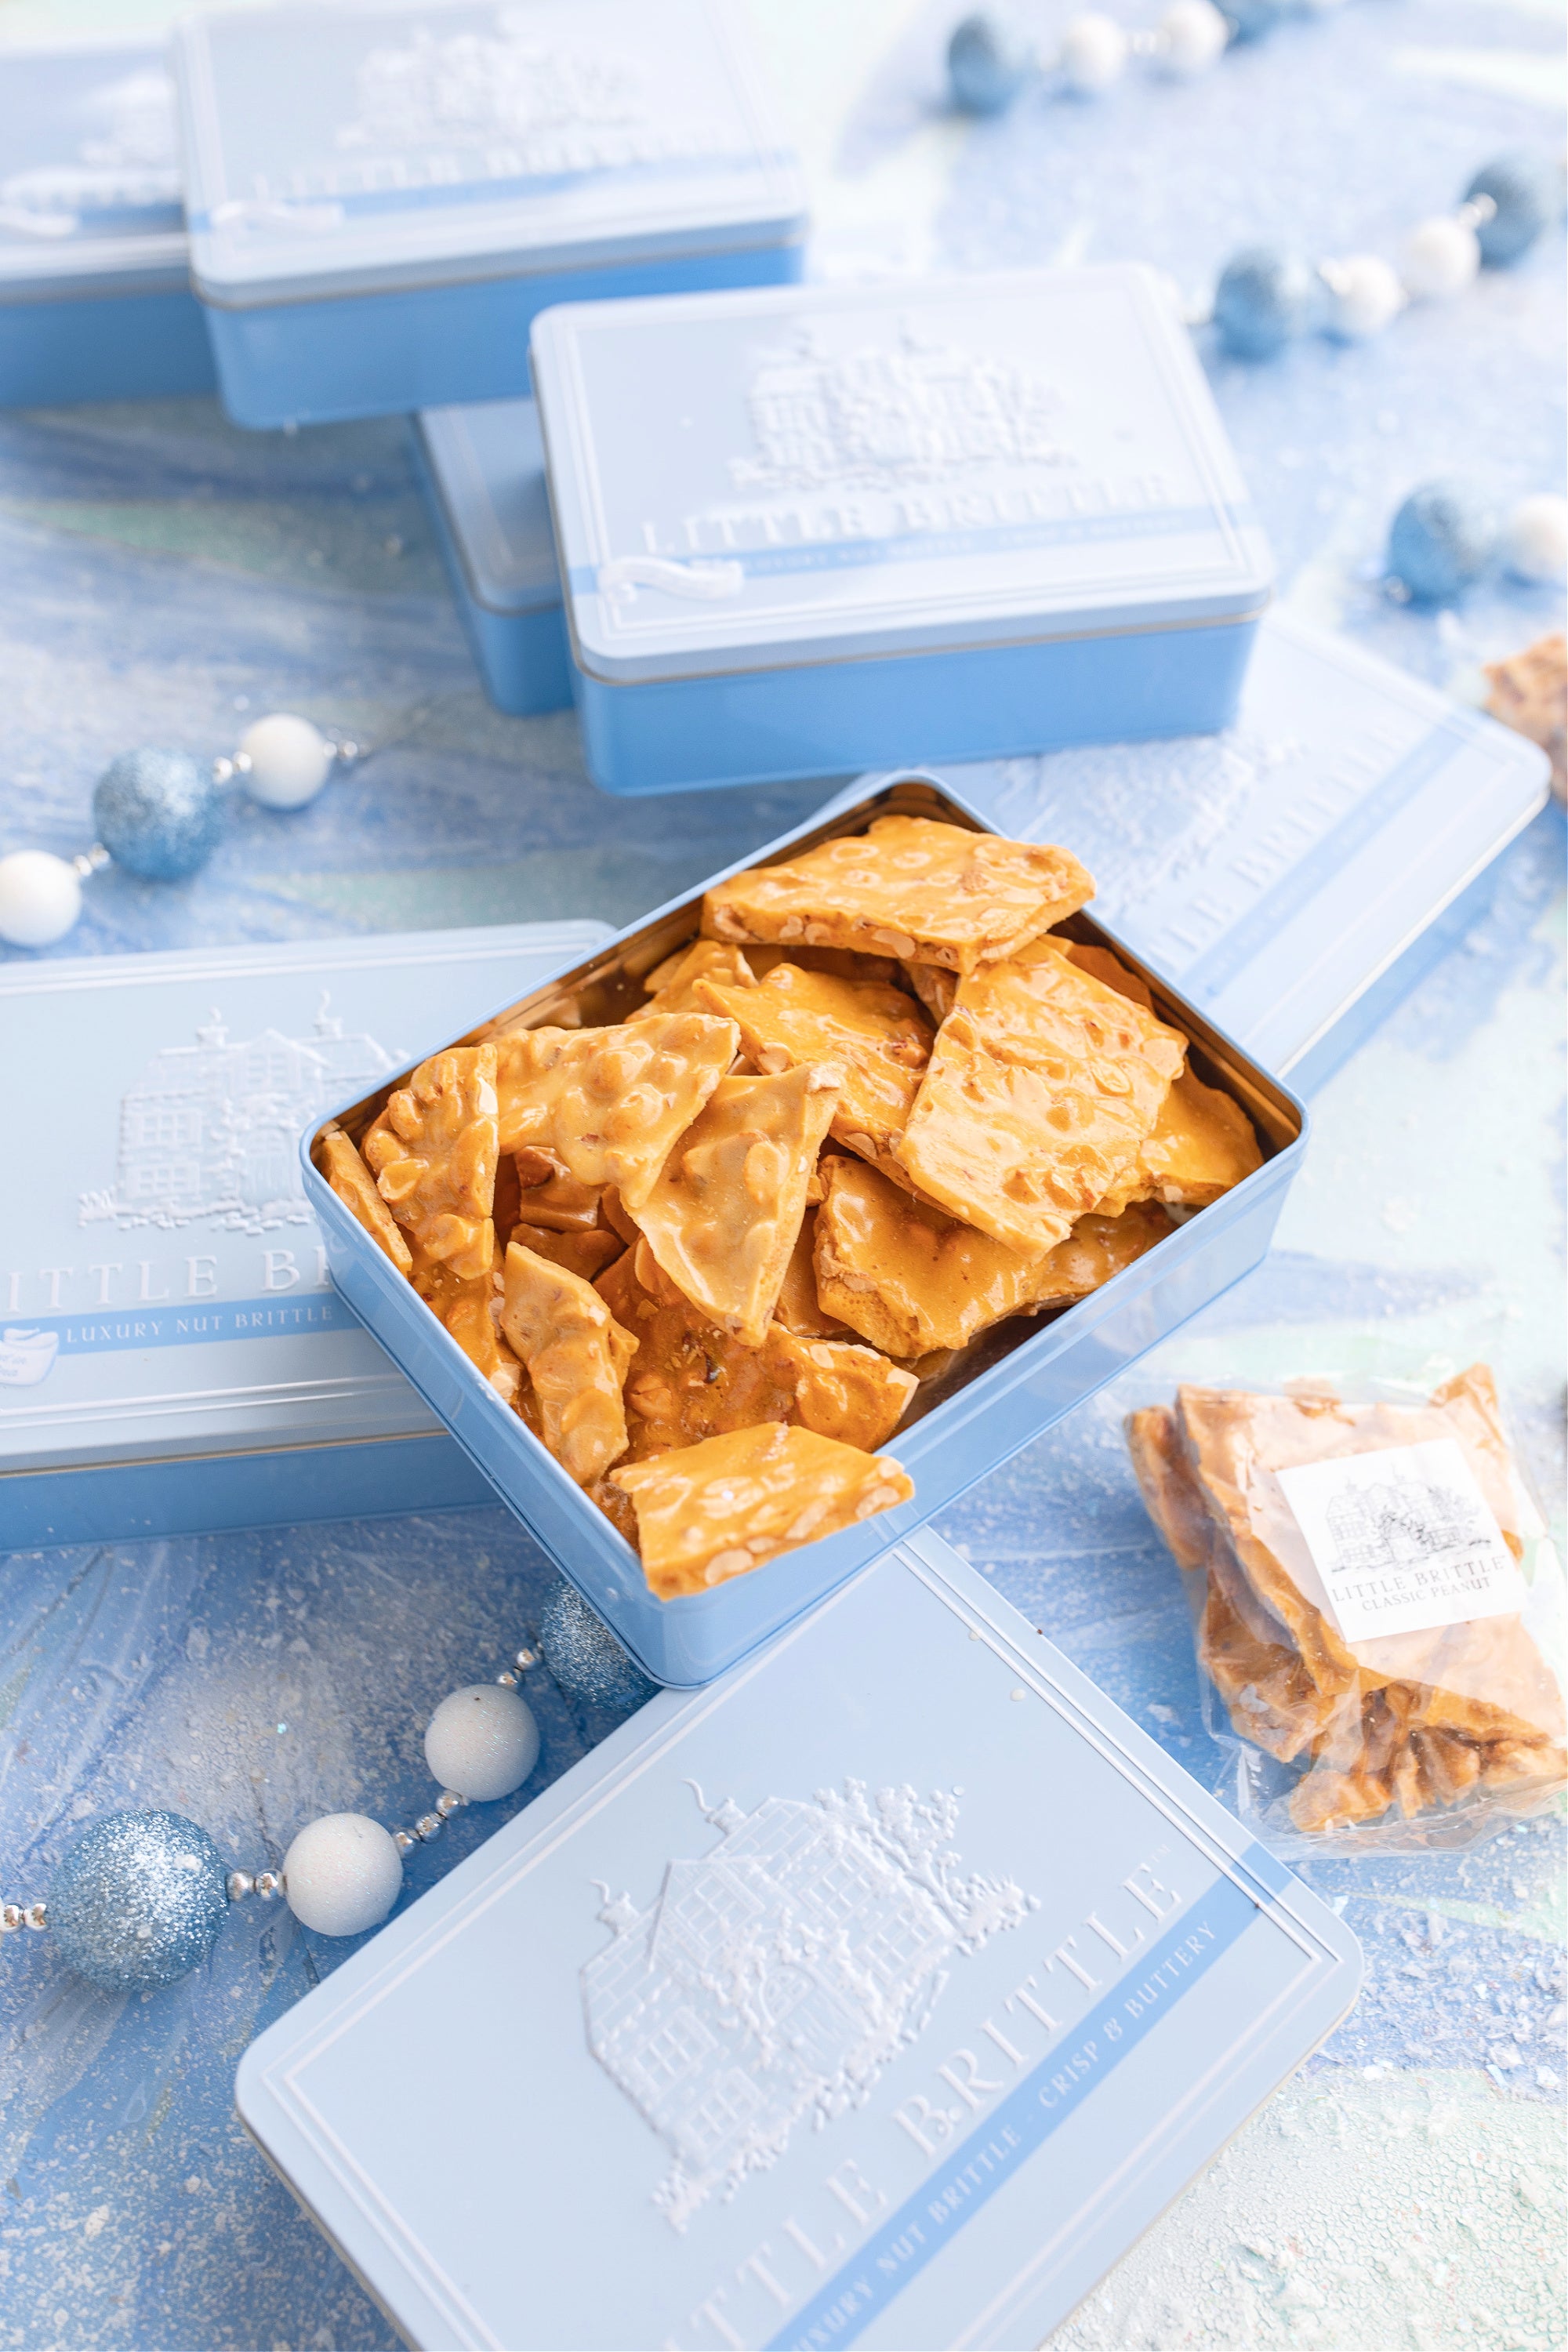 Little Brittle Signature Gifting Tin - 20 Ounces of Luxury Brittle